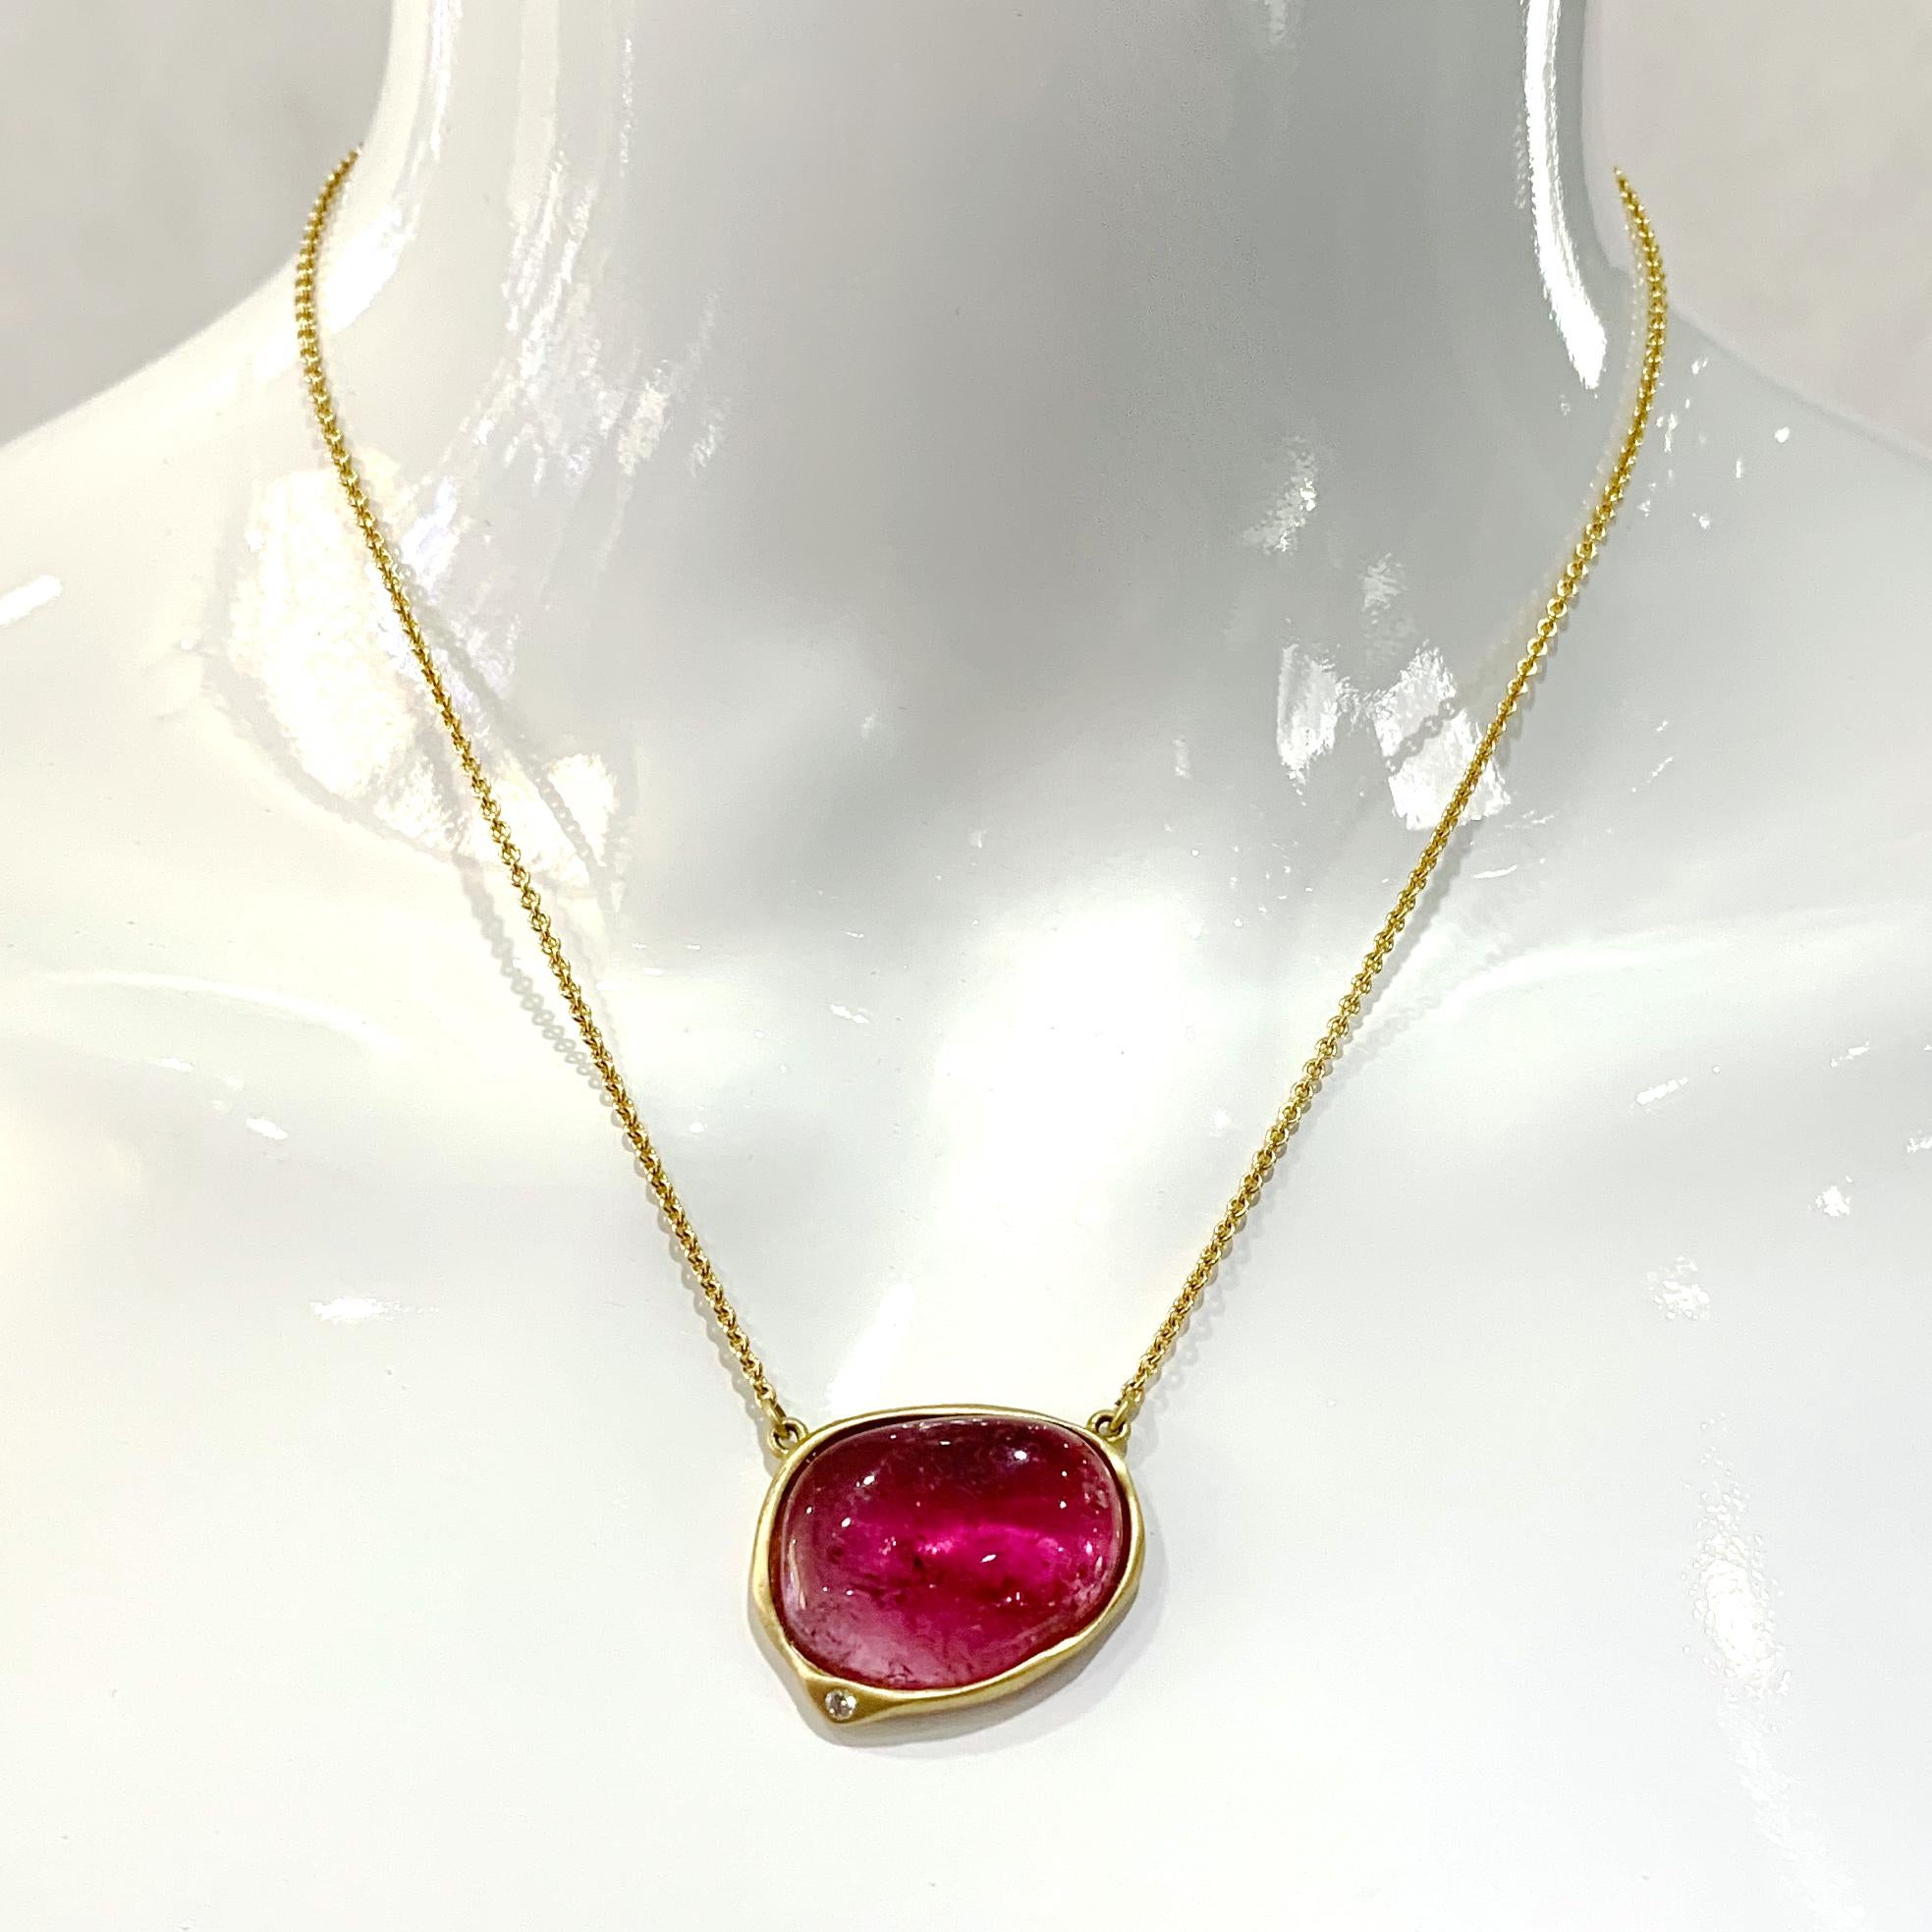 A large roughly egg-shaped cabochon of pink tourmaline sits in a freeform frame of 18 karat yellow gold with a smooth satin finish and a small diamond accent.  Eytan Brandes designed, sculpted and finished this pendant by hand here in our shop.  It